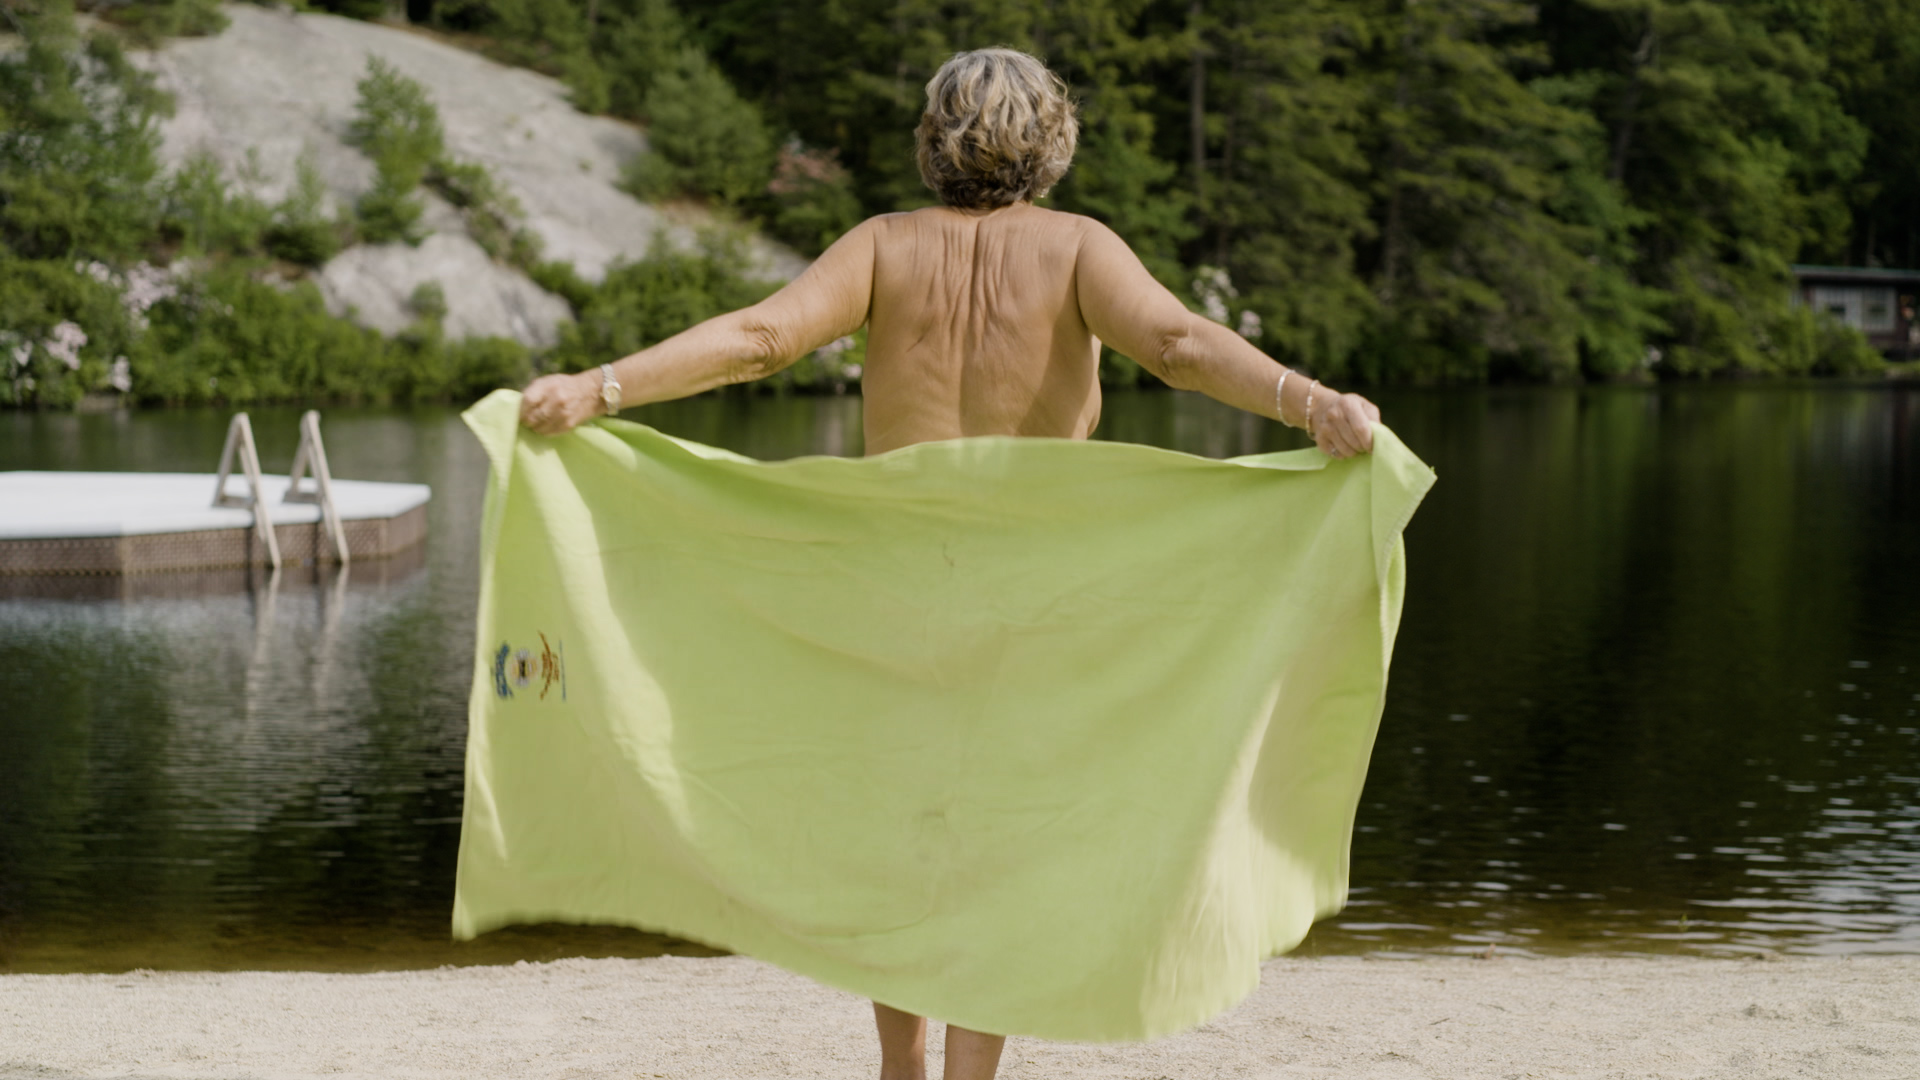 Nudist explains what you should definitely not do at a nude beach